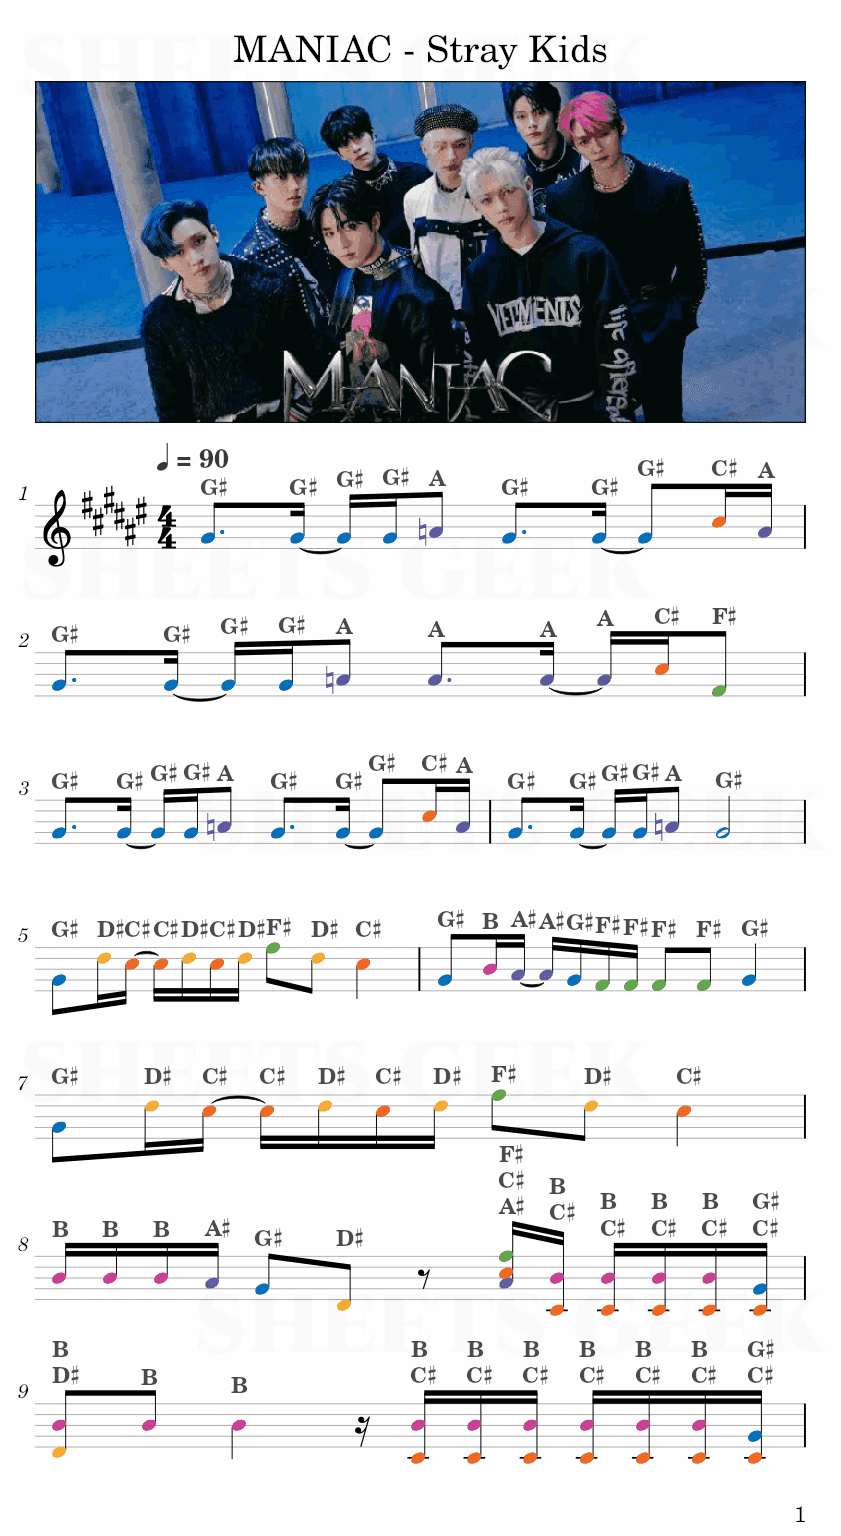 MANIAC - Stray Kids Easy Sheet Music Free for piano, keyboard, flute, violin, sax, cello page 1